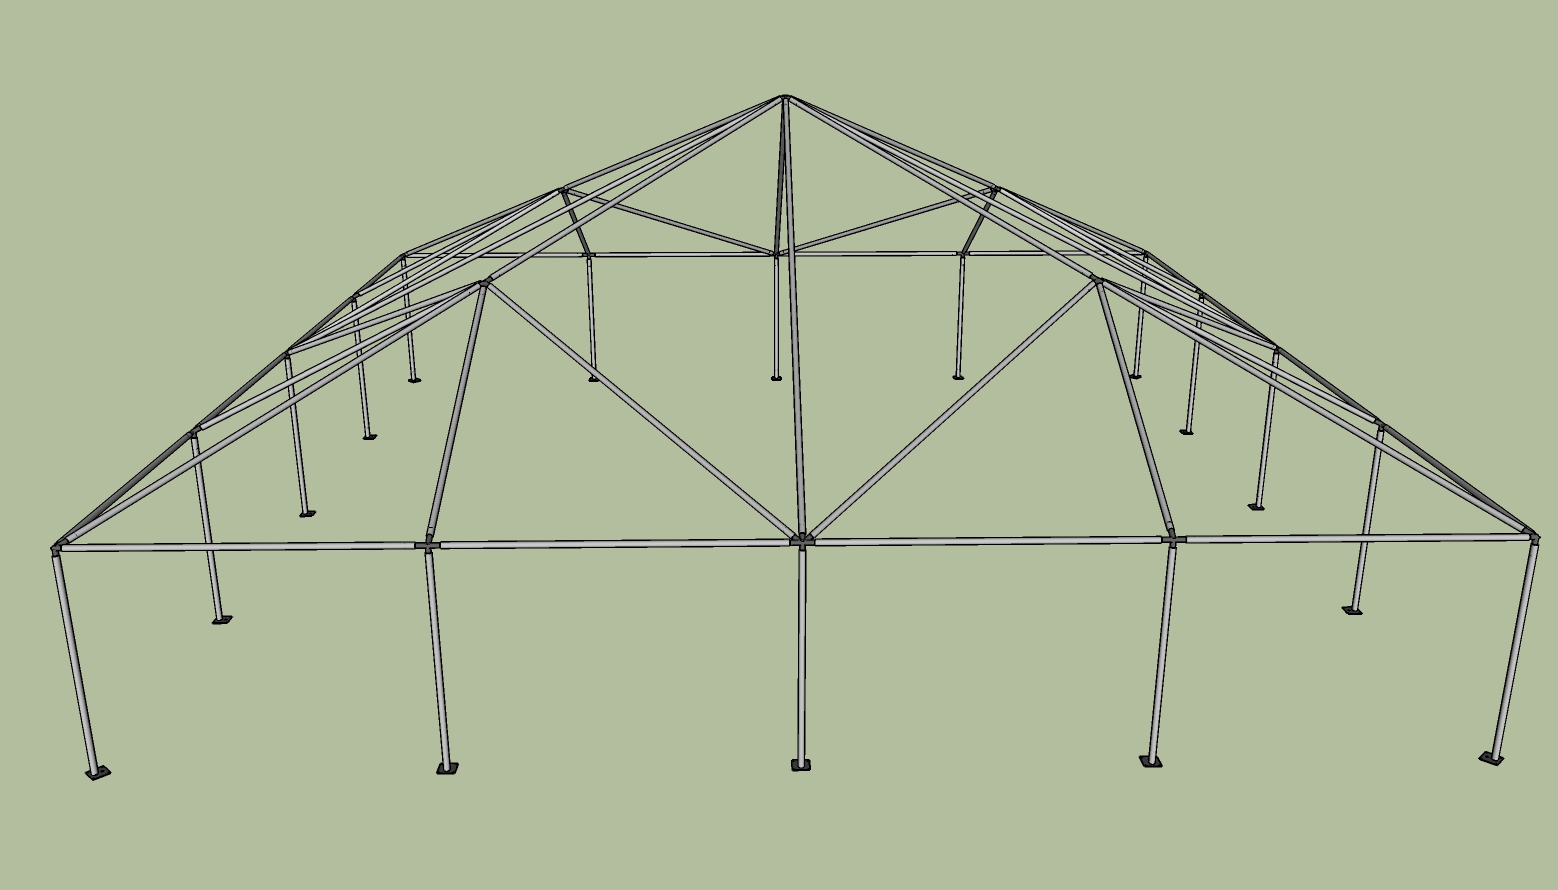 40x40 frame tent side view